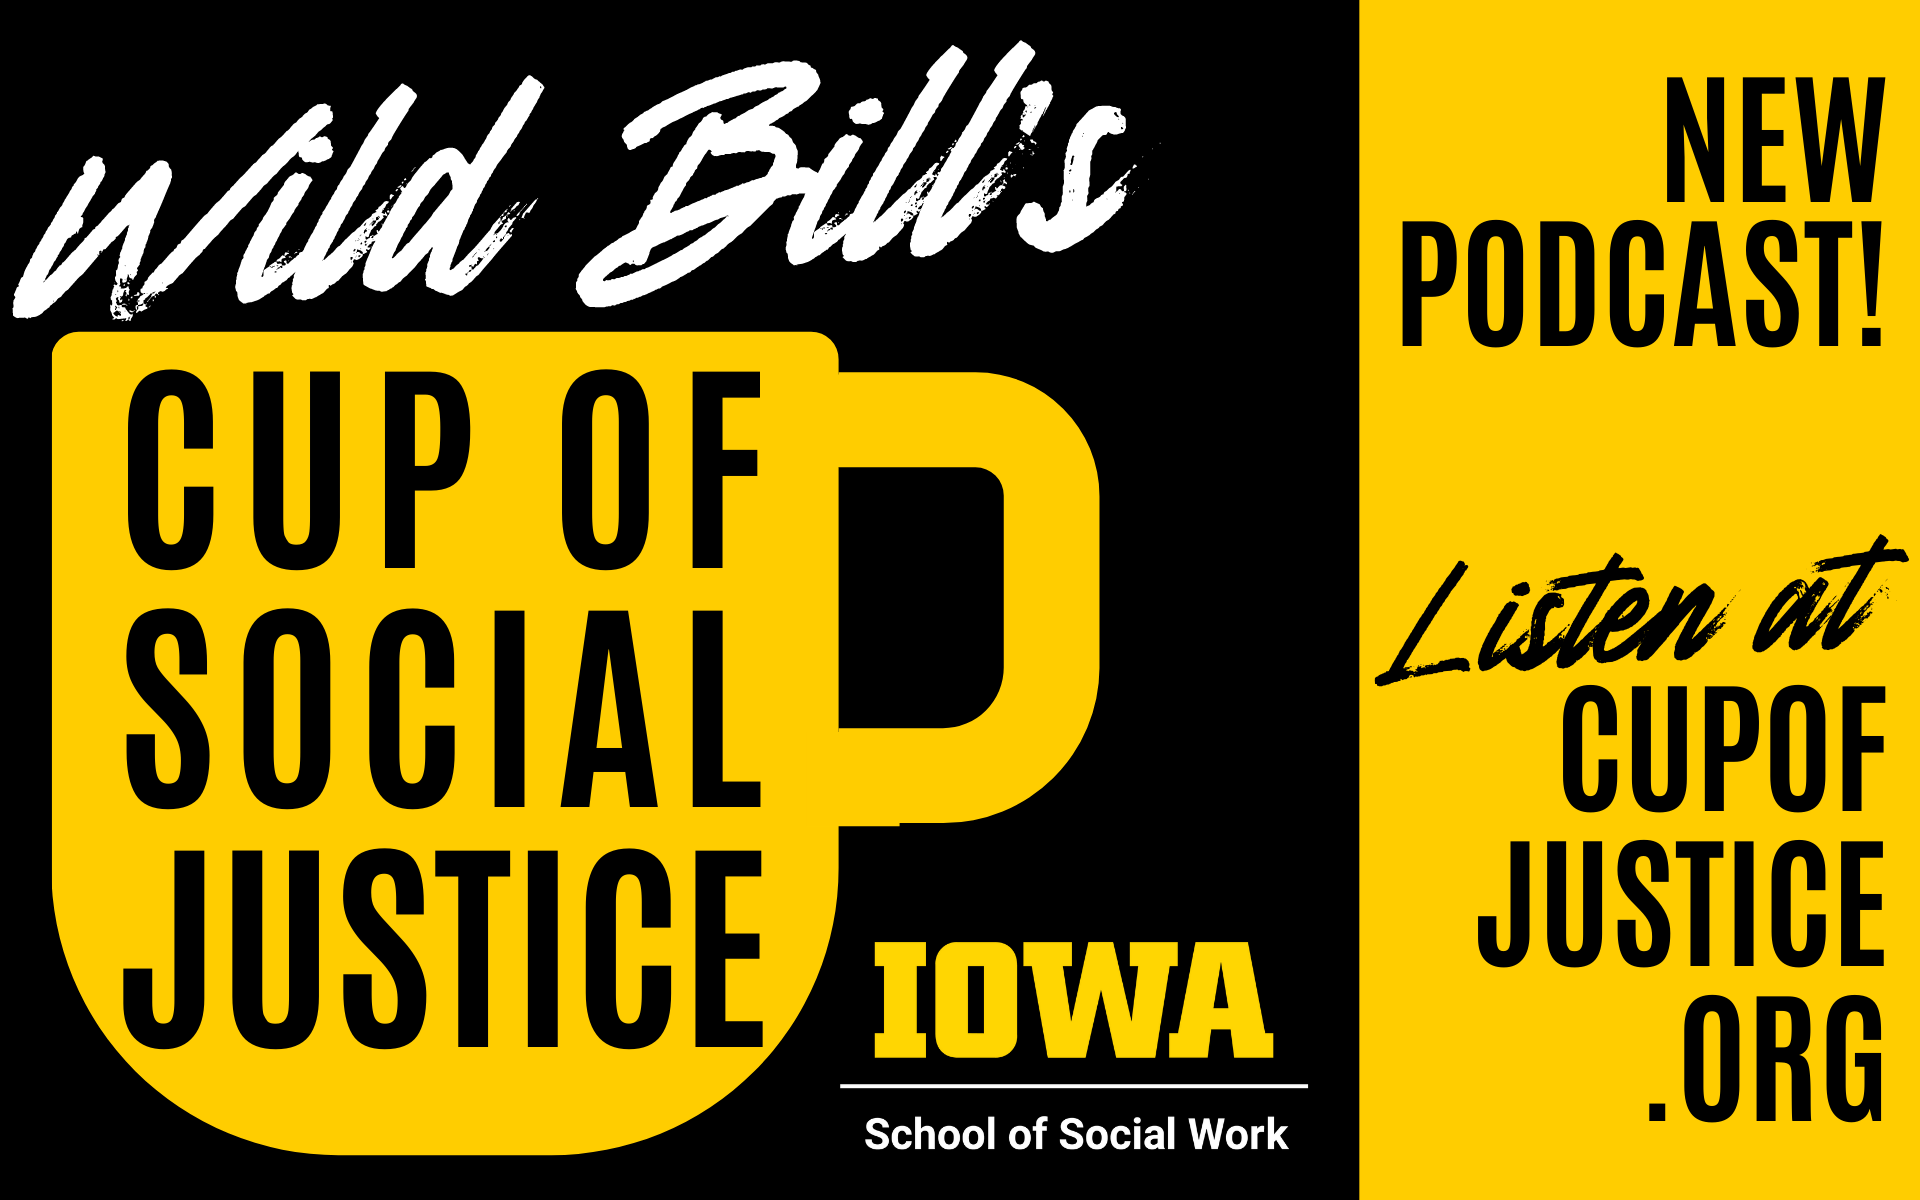 wild bill's cup of social justice podcast listen at cupofjustice.org